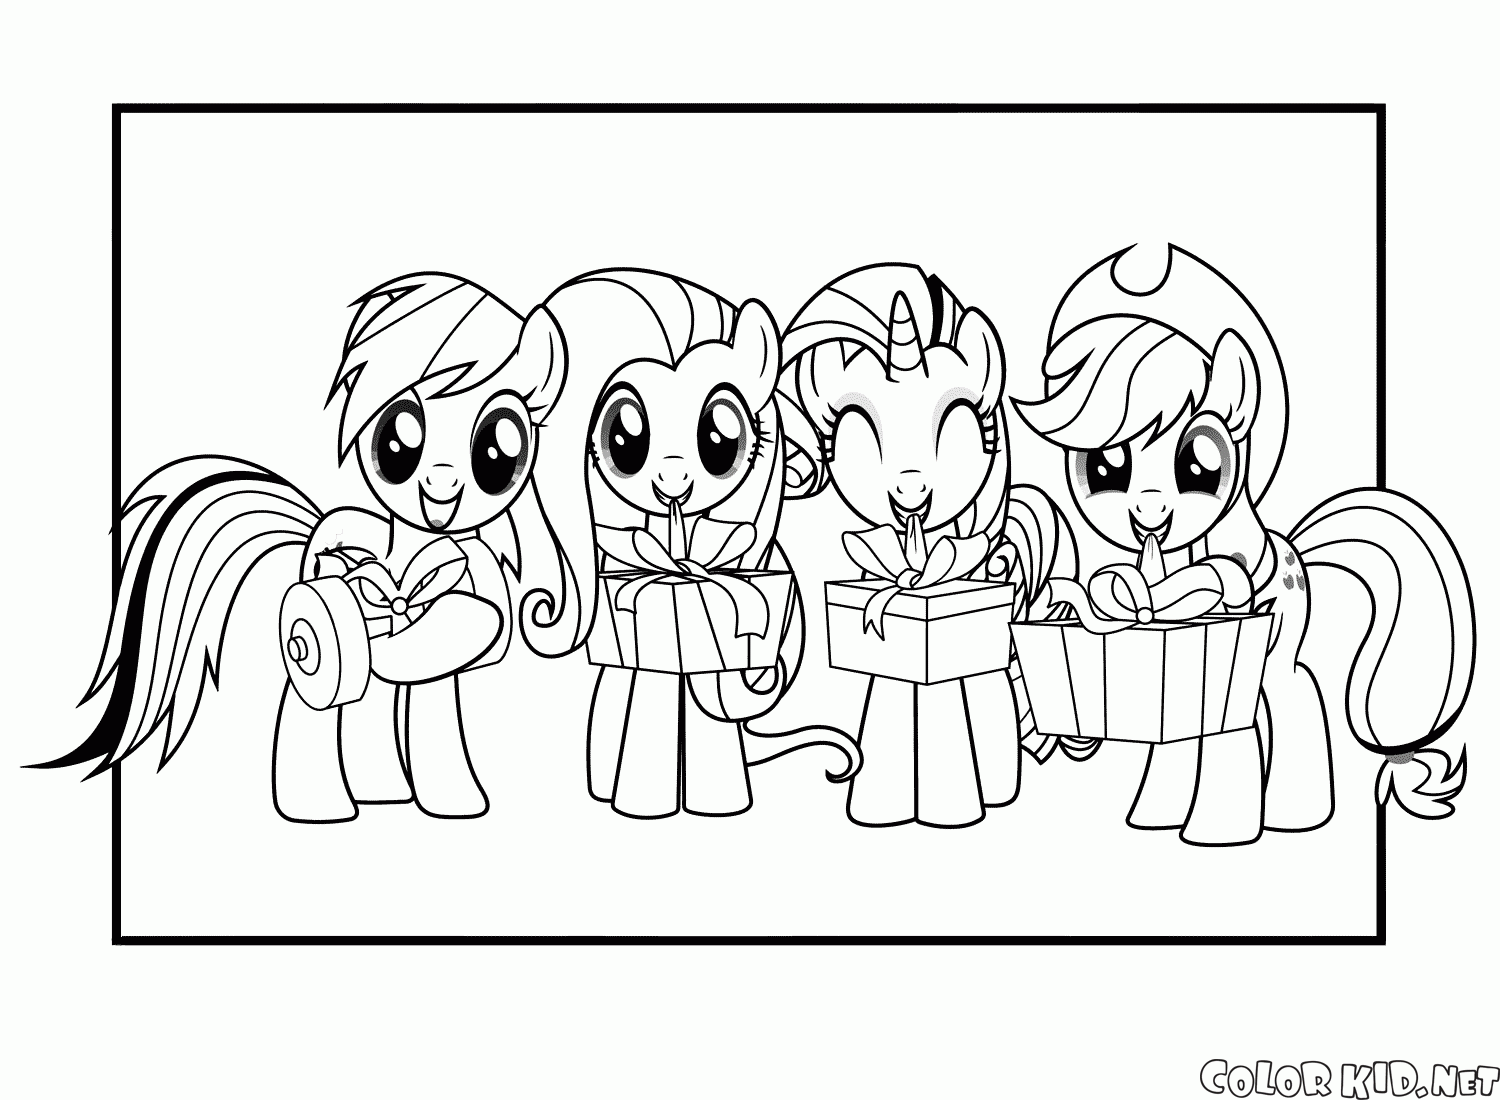 Coloring page - Best pony friends